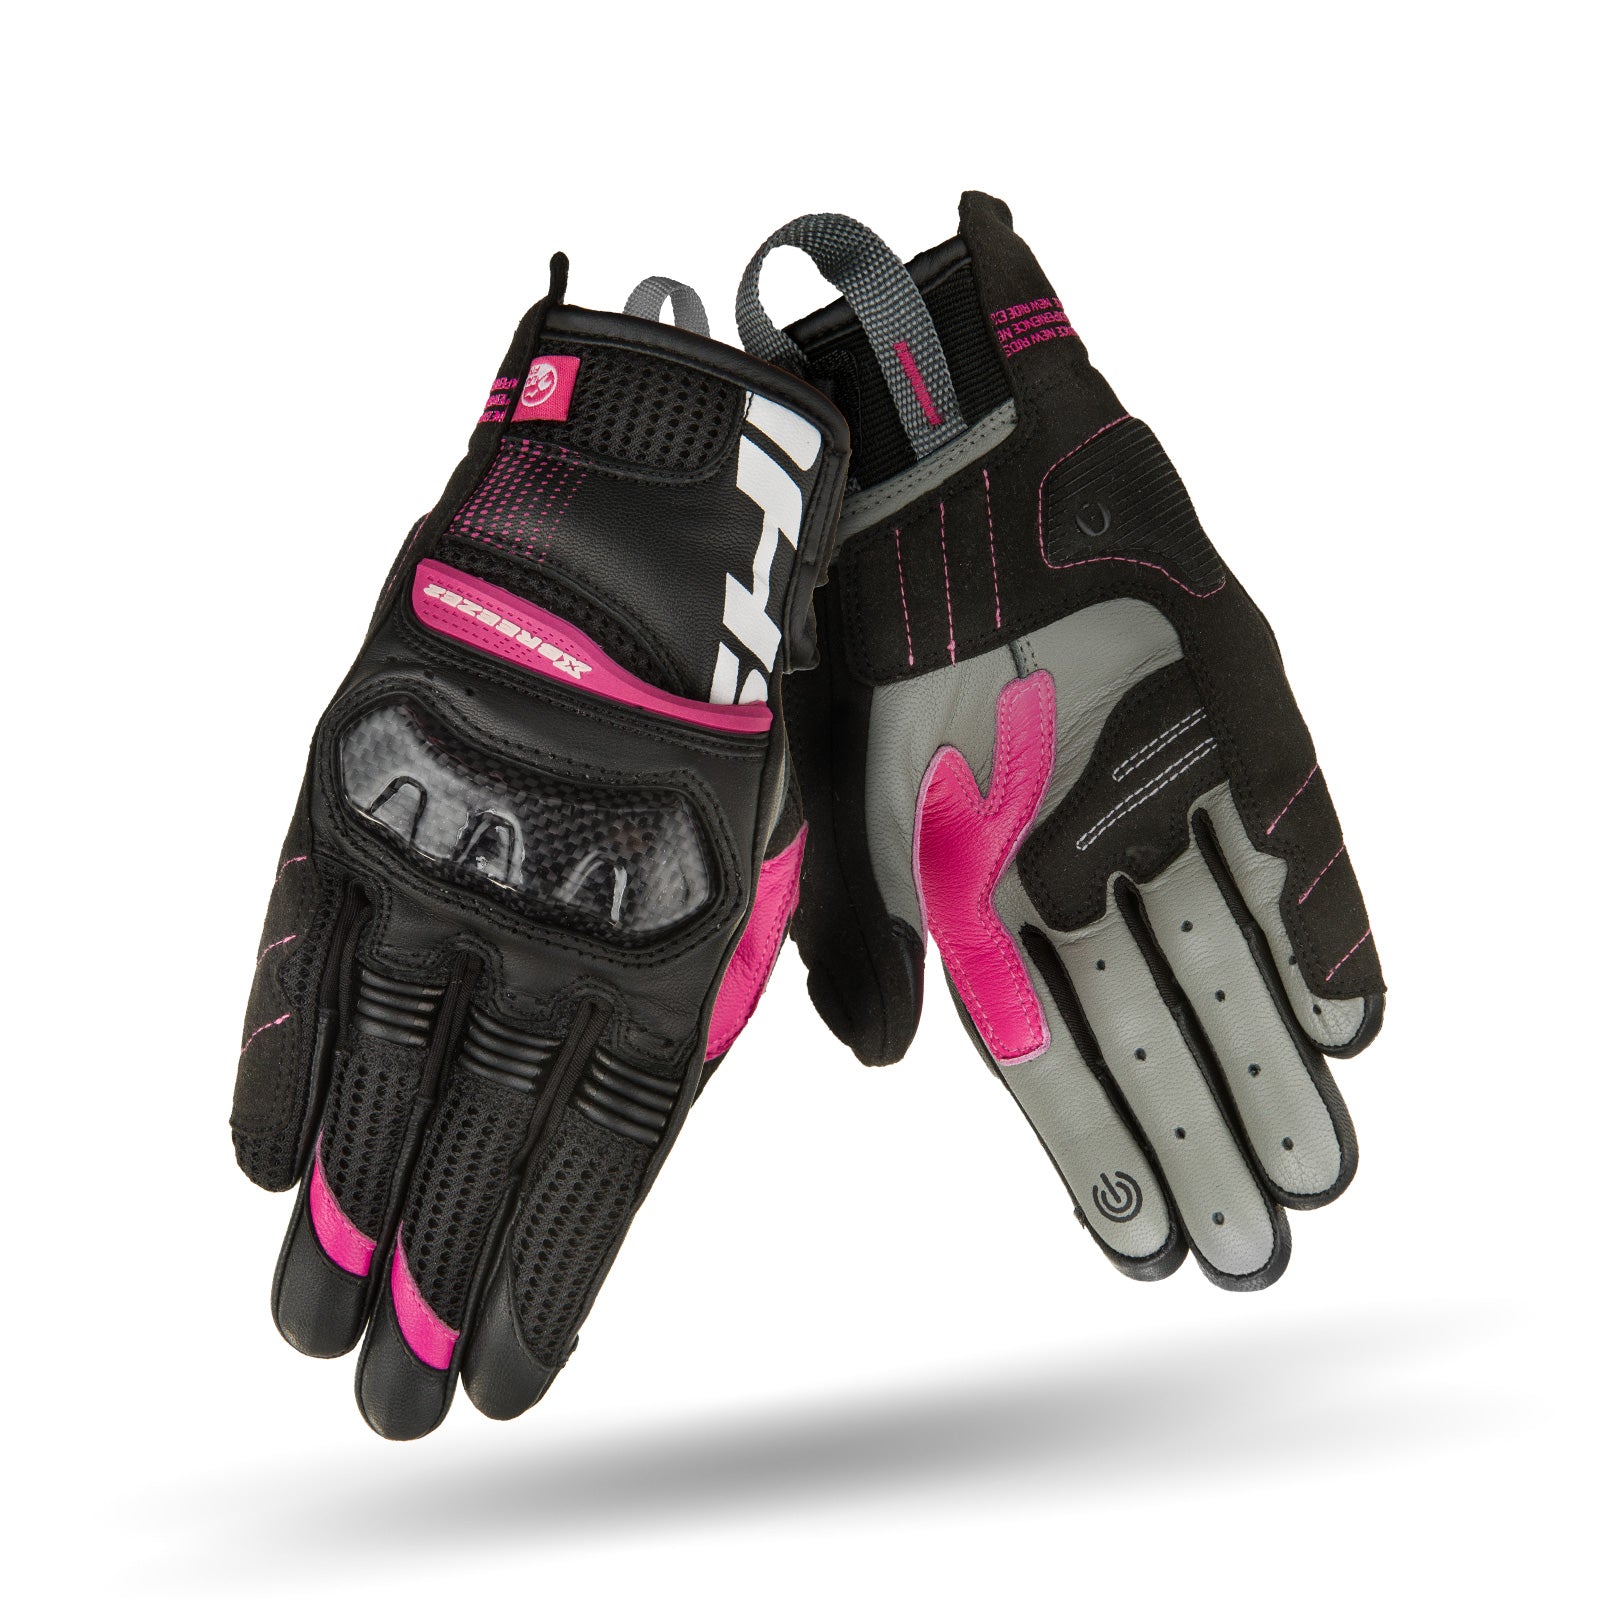 Black and pink women's motorcycle glove from Shimas